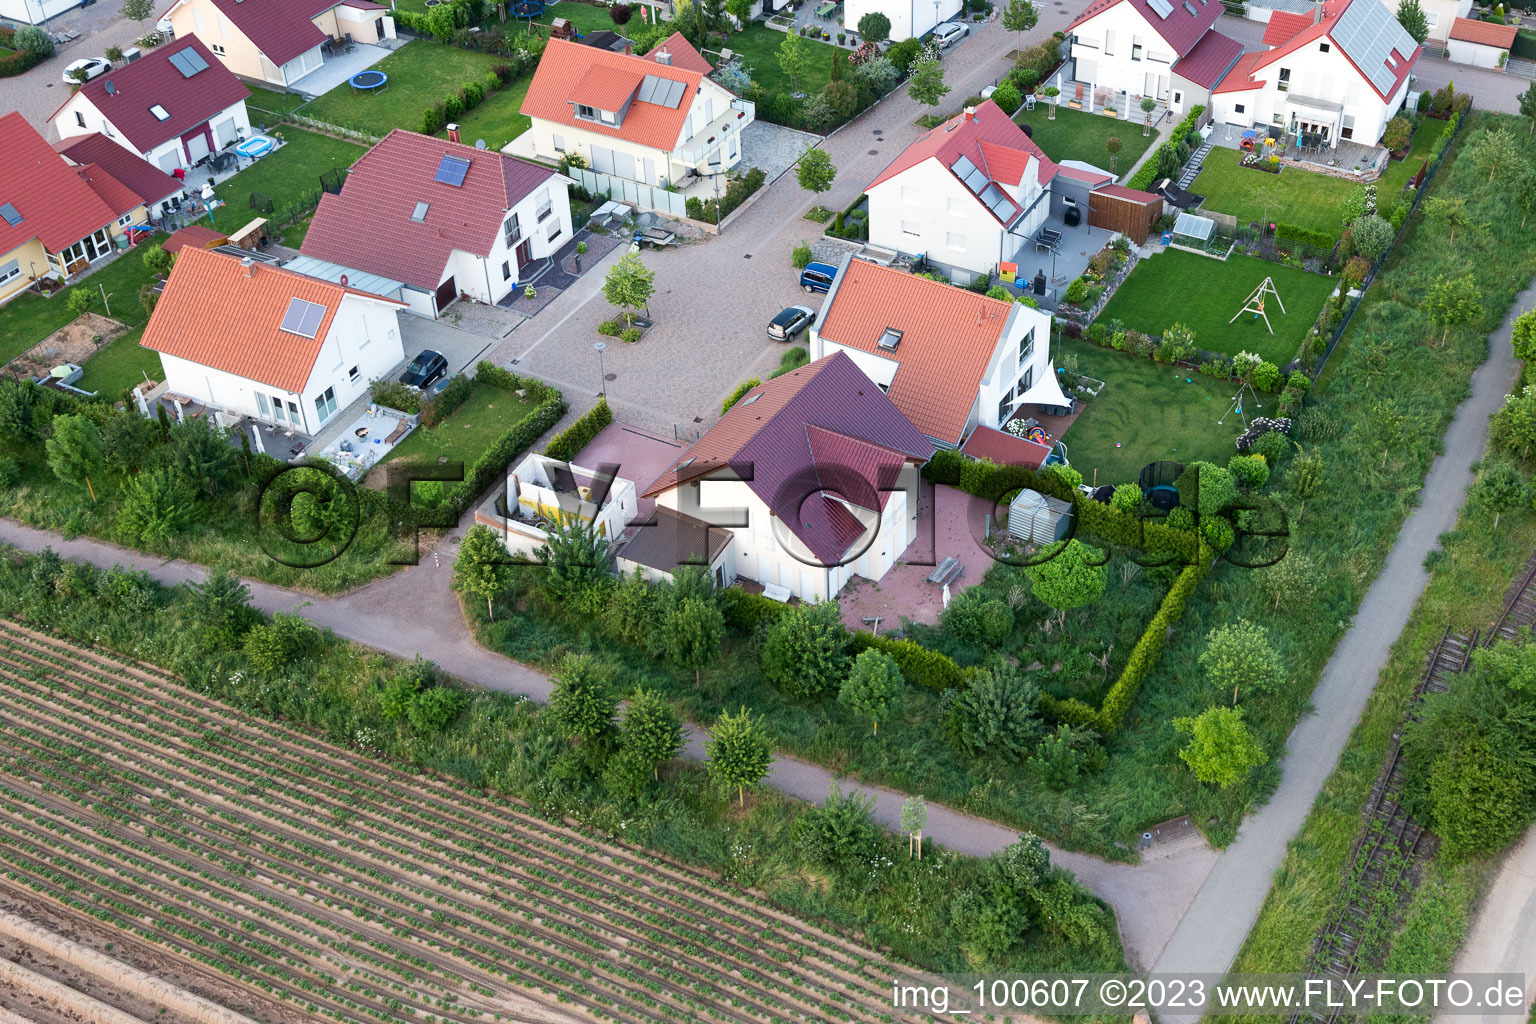 District Mörlheim in Landau in der Pfalz in the state Rhineland-Palatinate, Germany from the drone perspective